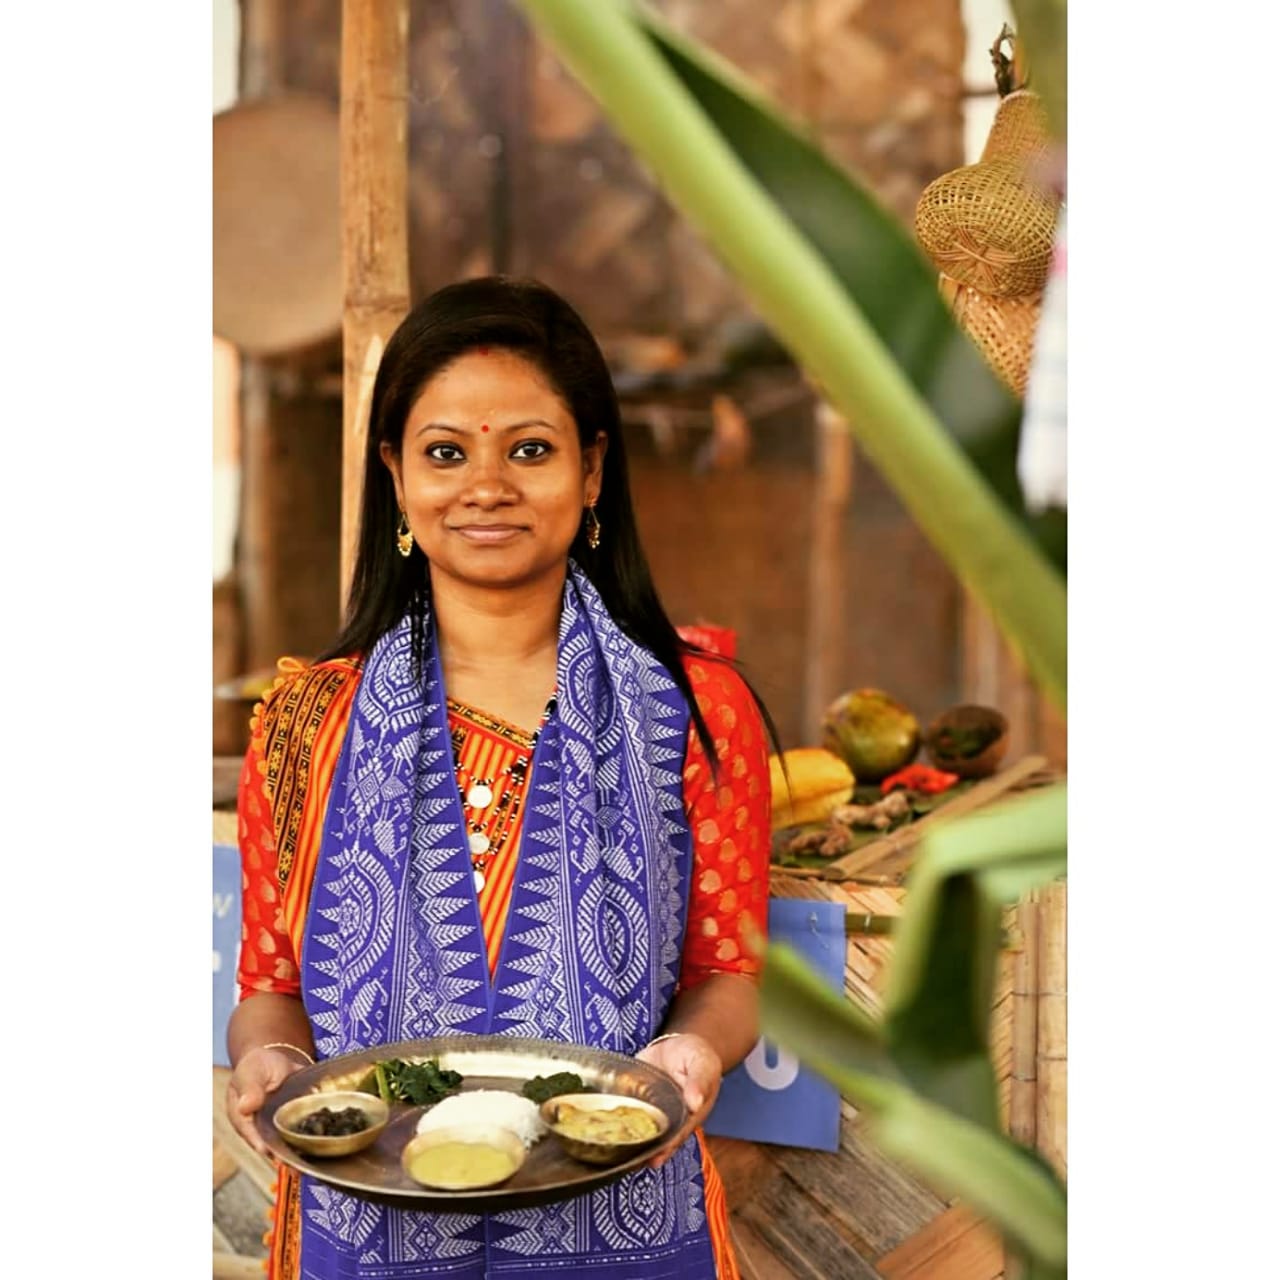 Meet the food enthusiast trying to boost culinary travel in Assam